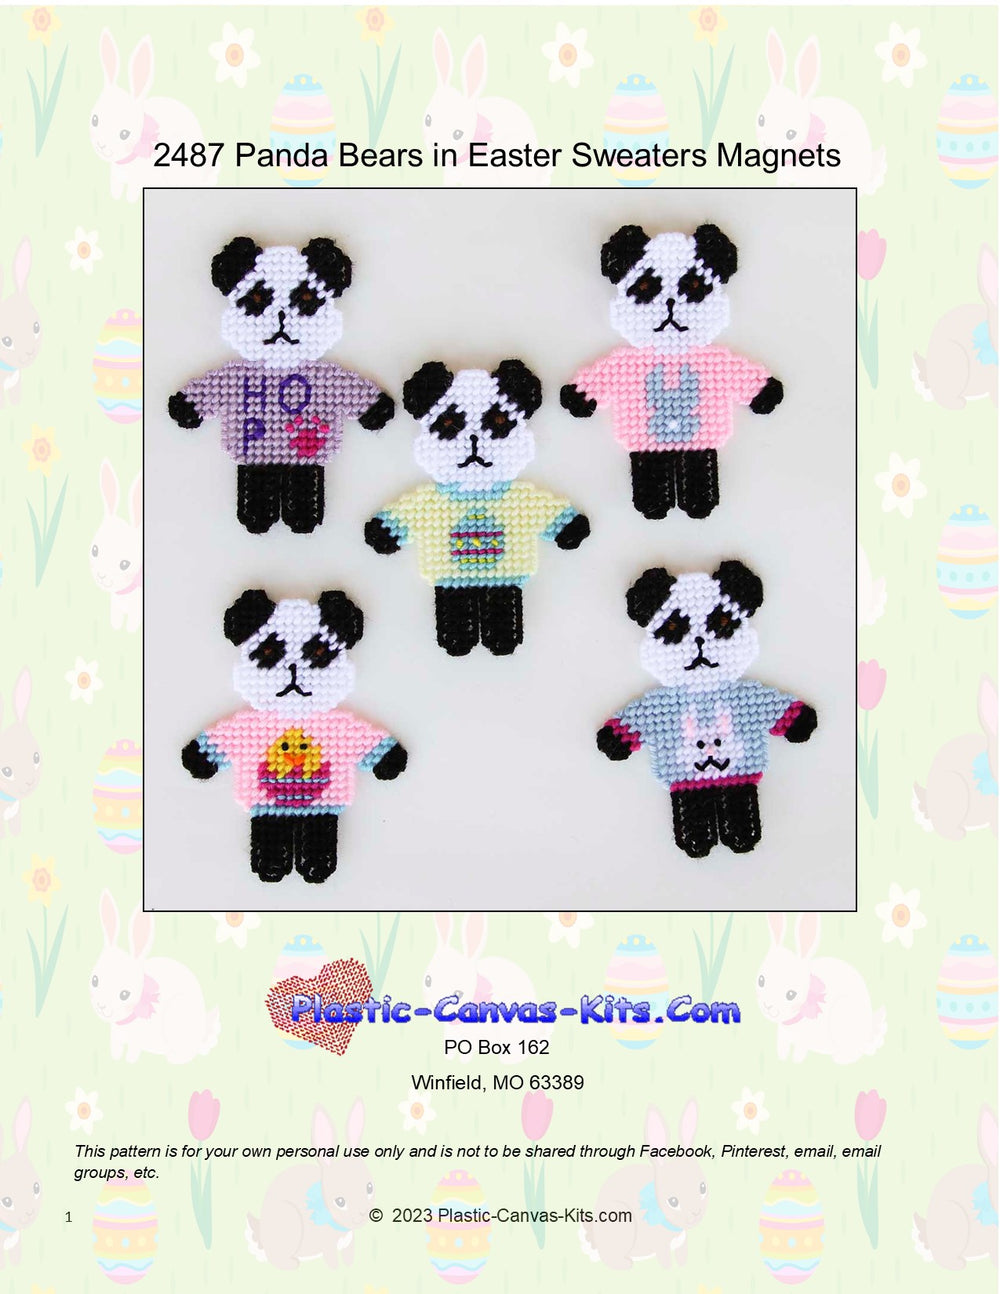 Panda Bears in Easter Sweaters Magnets